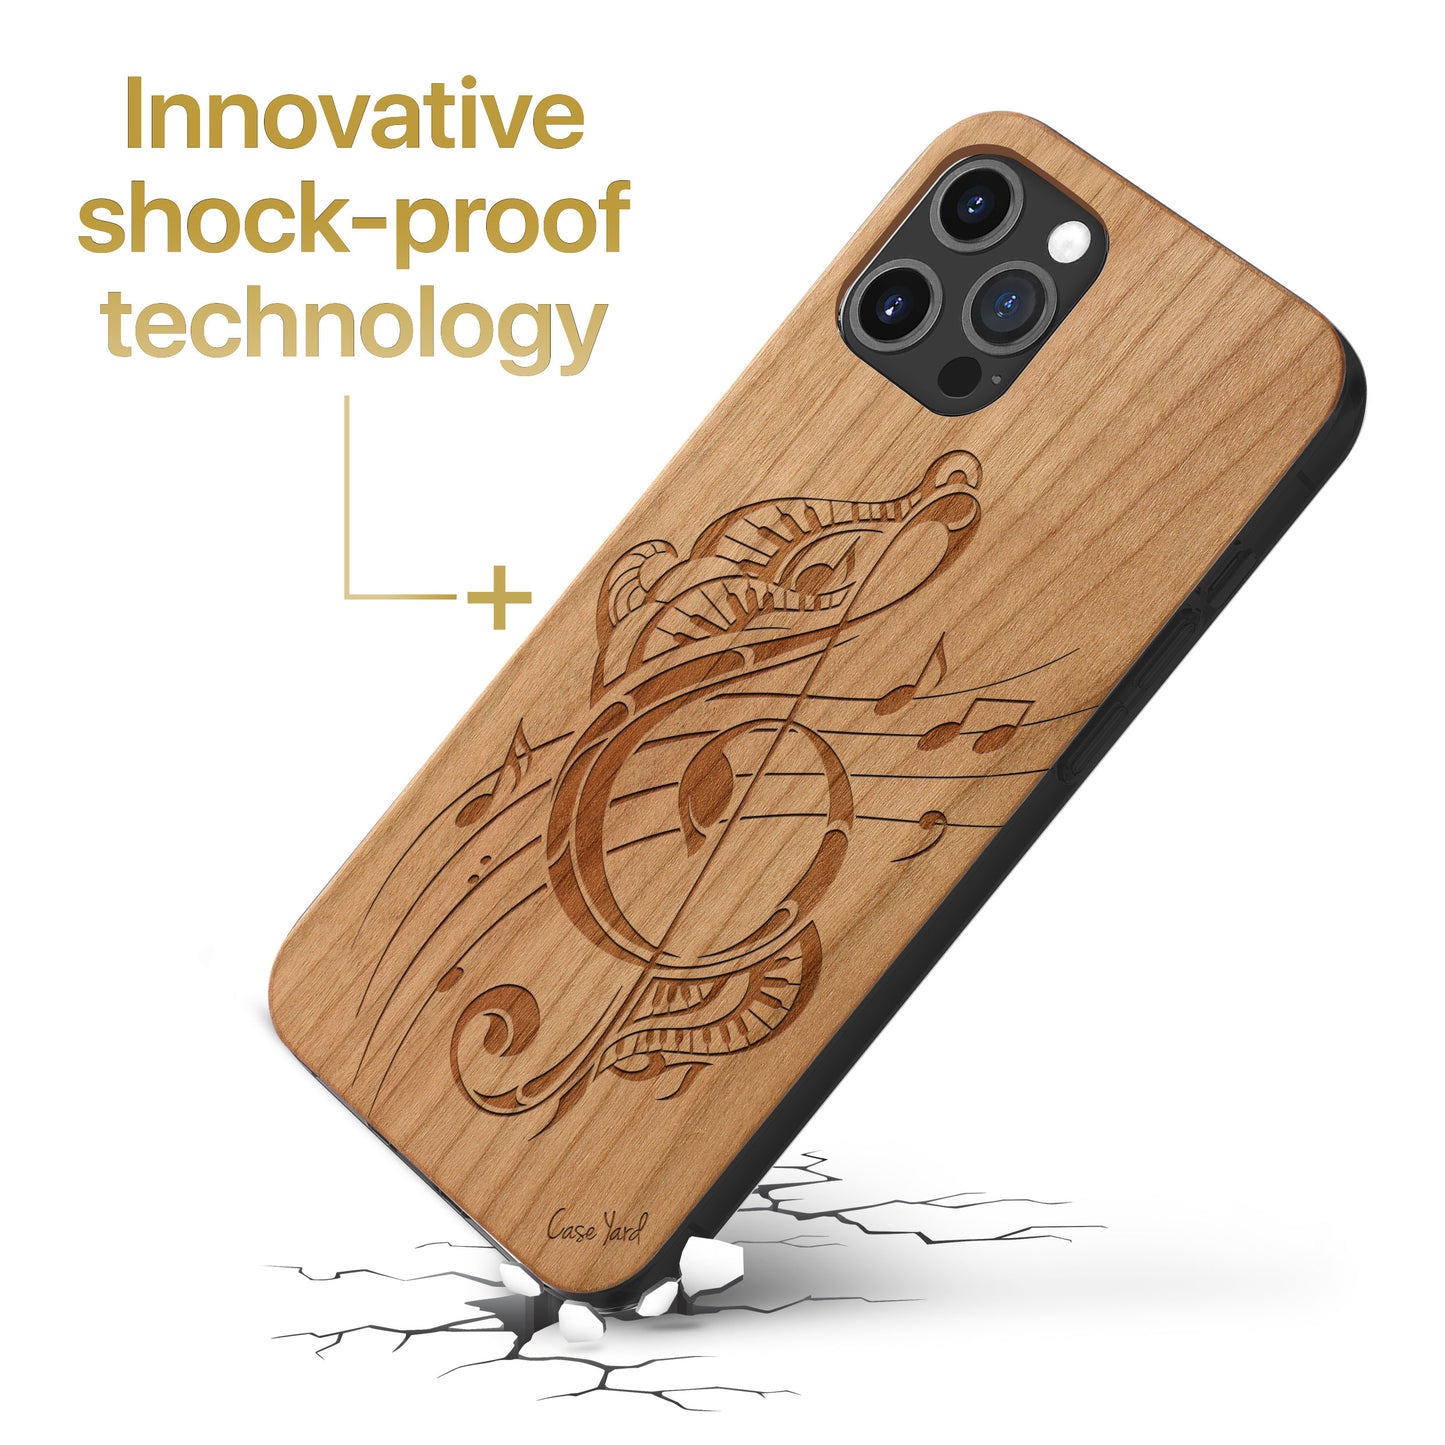 Wooden Cell Phone Case Cover, Laser Engraved case for iPhone & Samsung phone Tribal Music Note Design